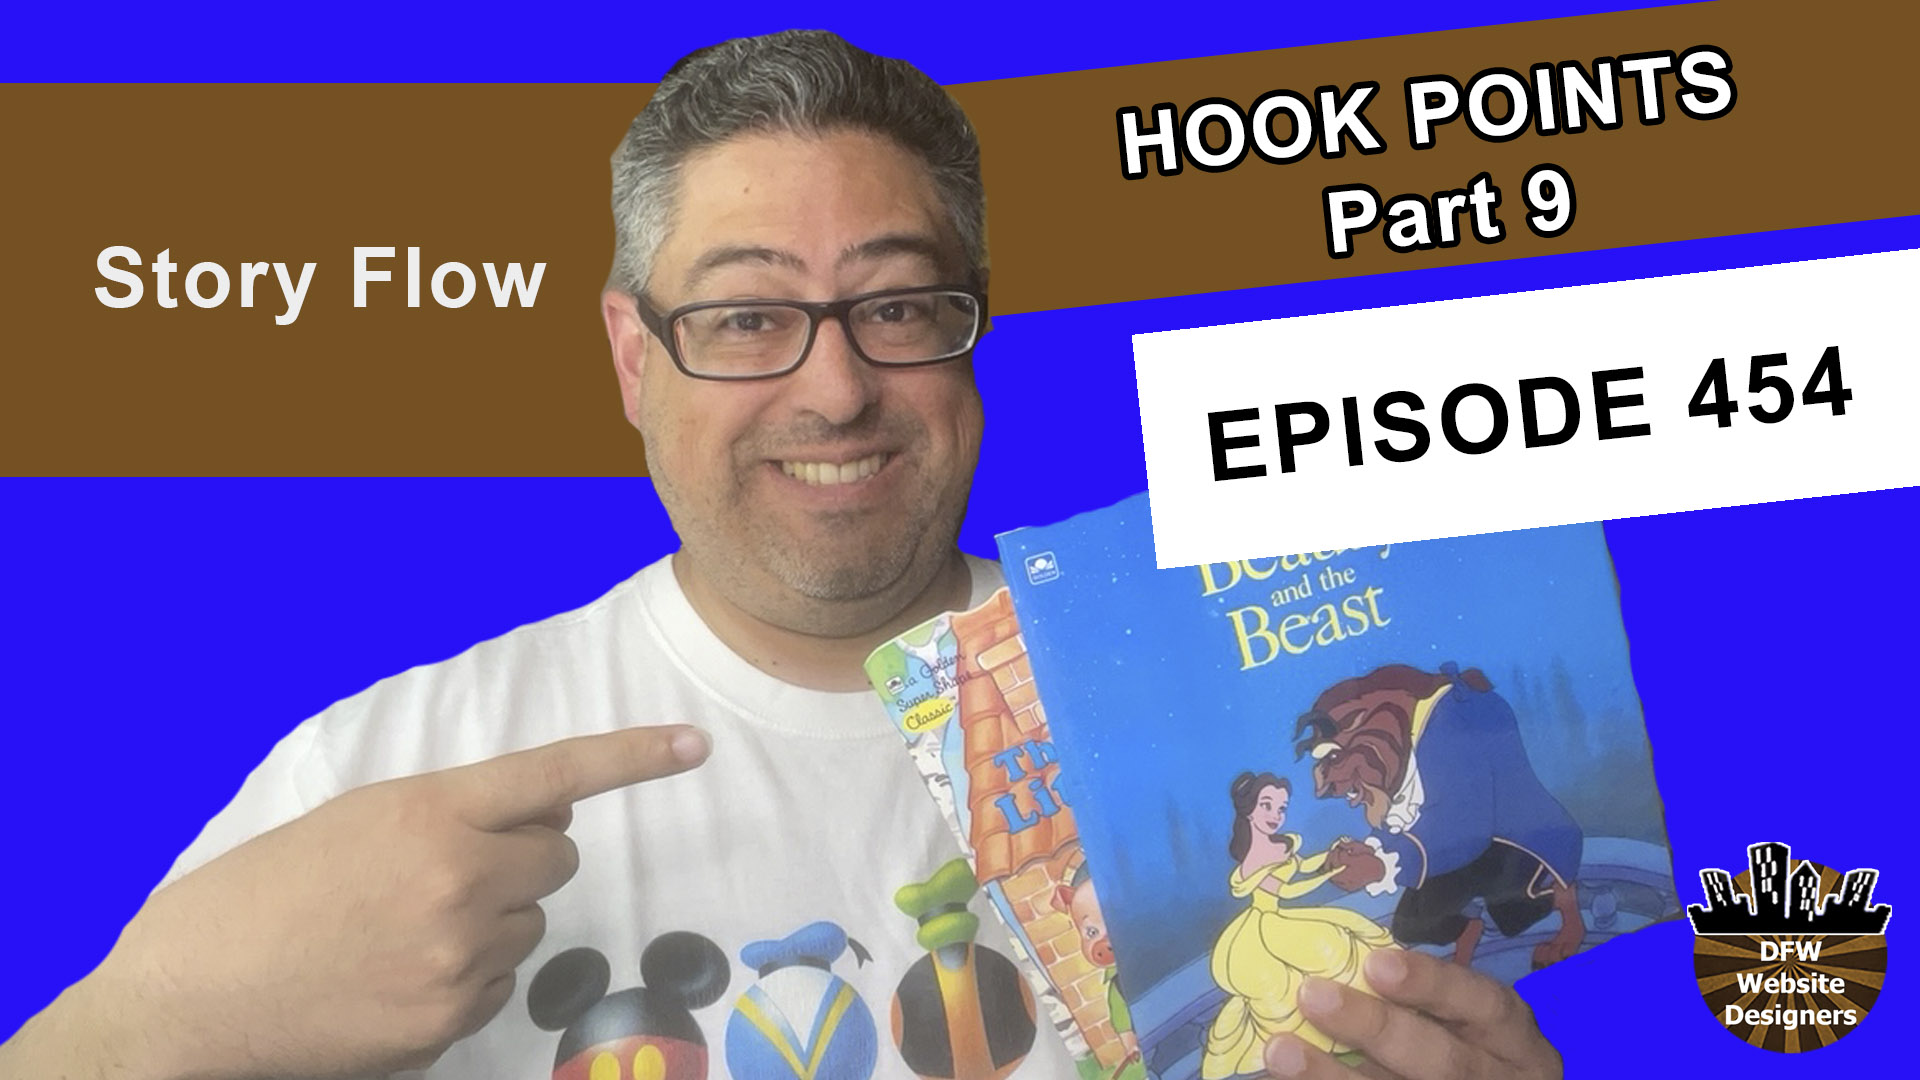 Episode 454 Hook Points Part 9 Story Flow: Good, Dragon, Knight